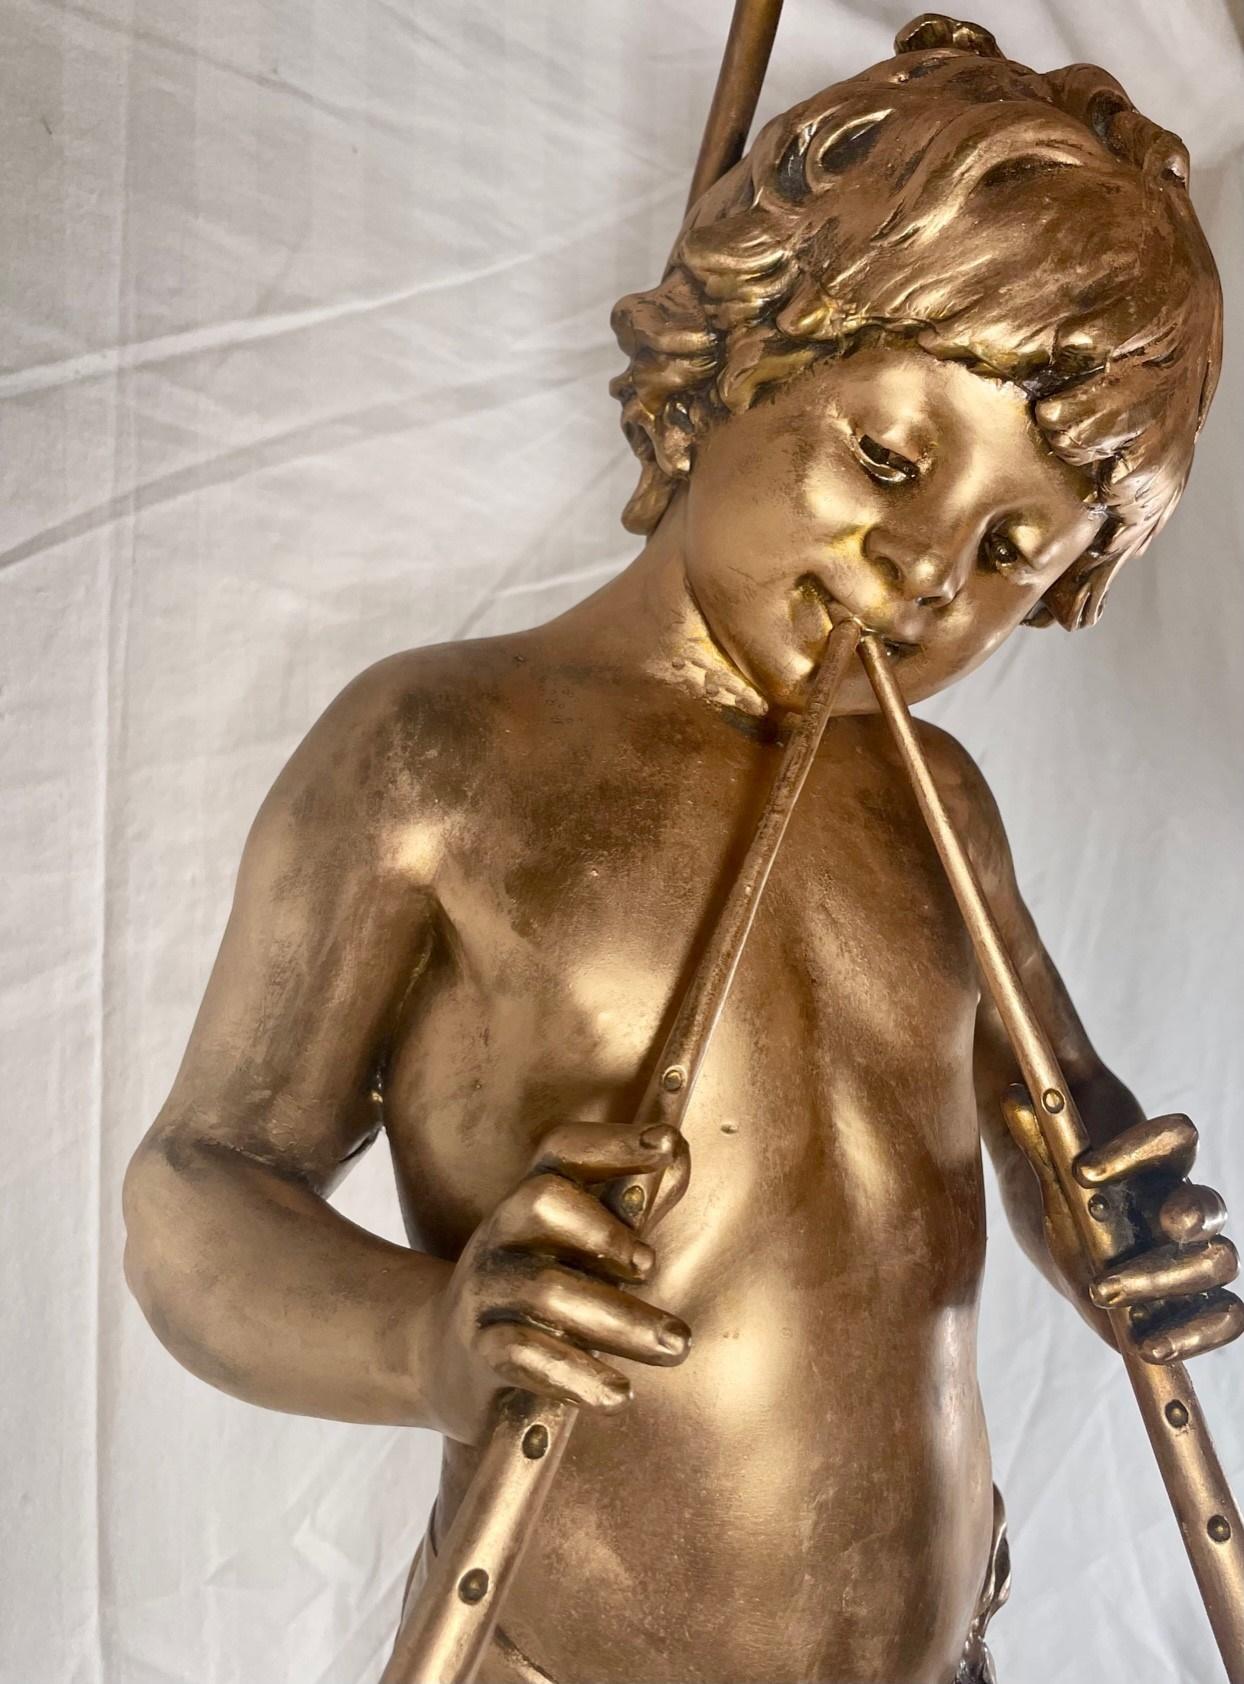 19th Century French Gilt Bronzed Lamp Sculpture “Boy with Flute”, Signed Moreau. For Sale 4